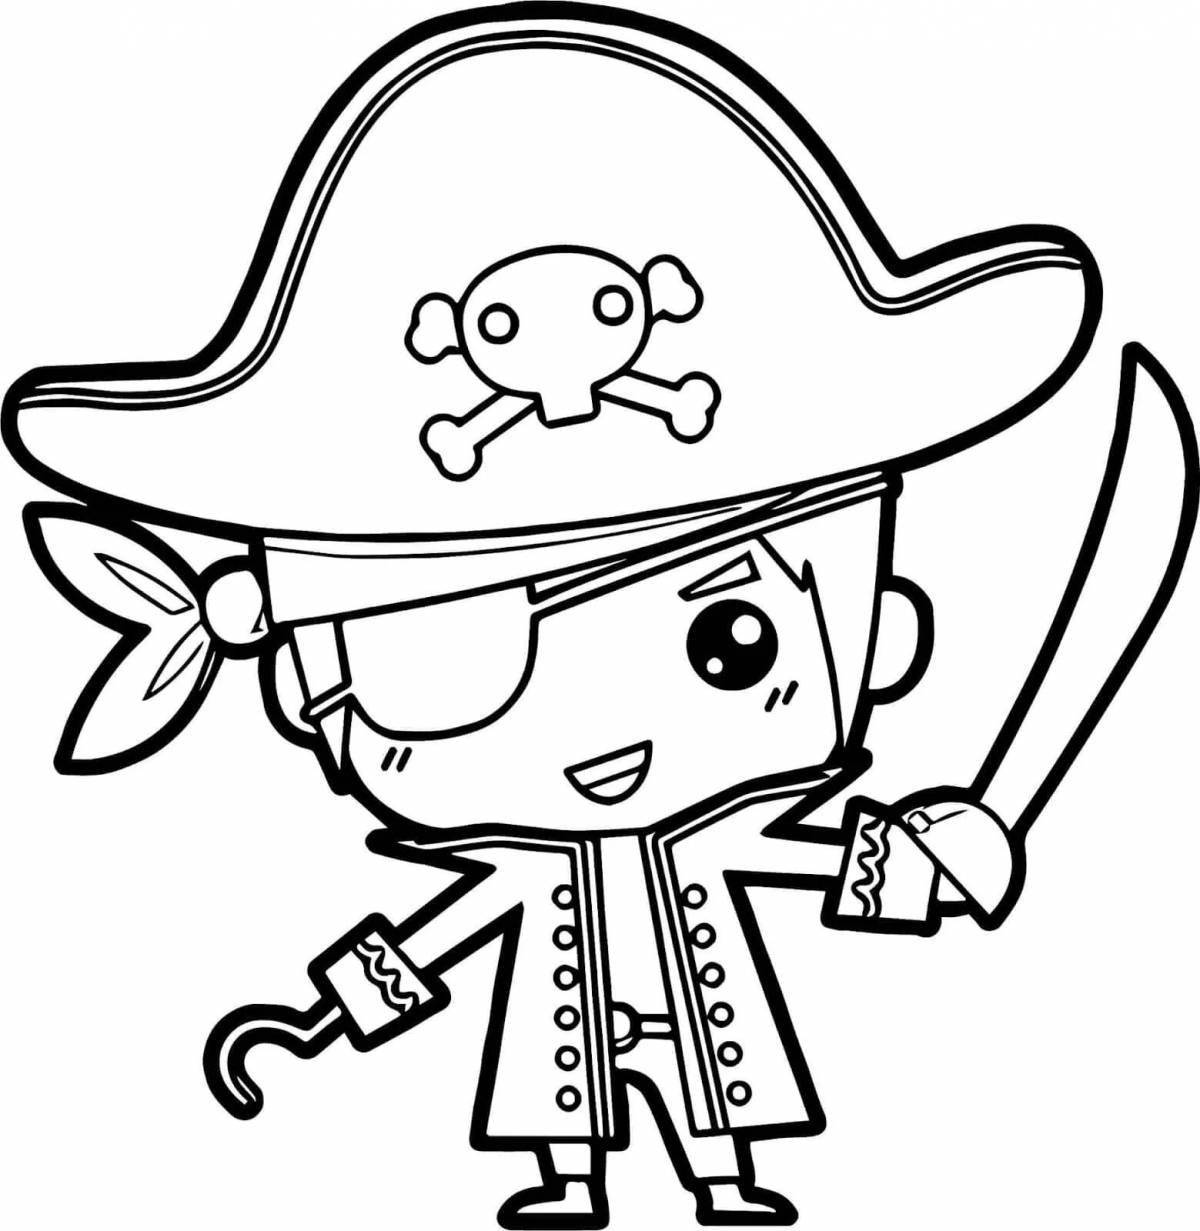 Shiny pirate coloring book